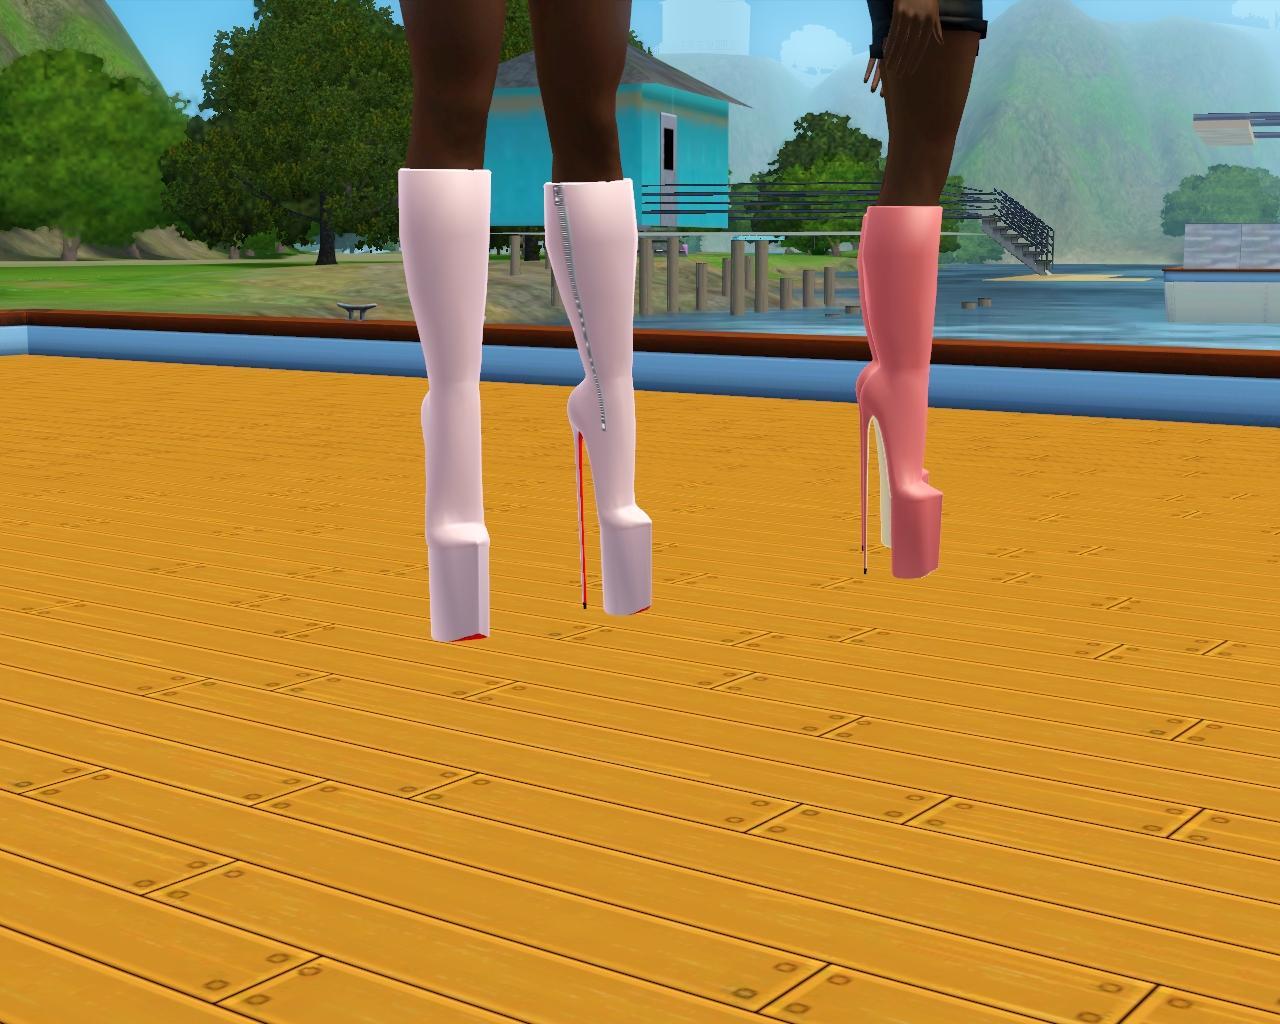 [REMESH] Impossible Boots Victoire Platforms by JoshQ